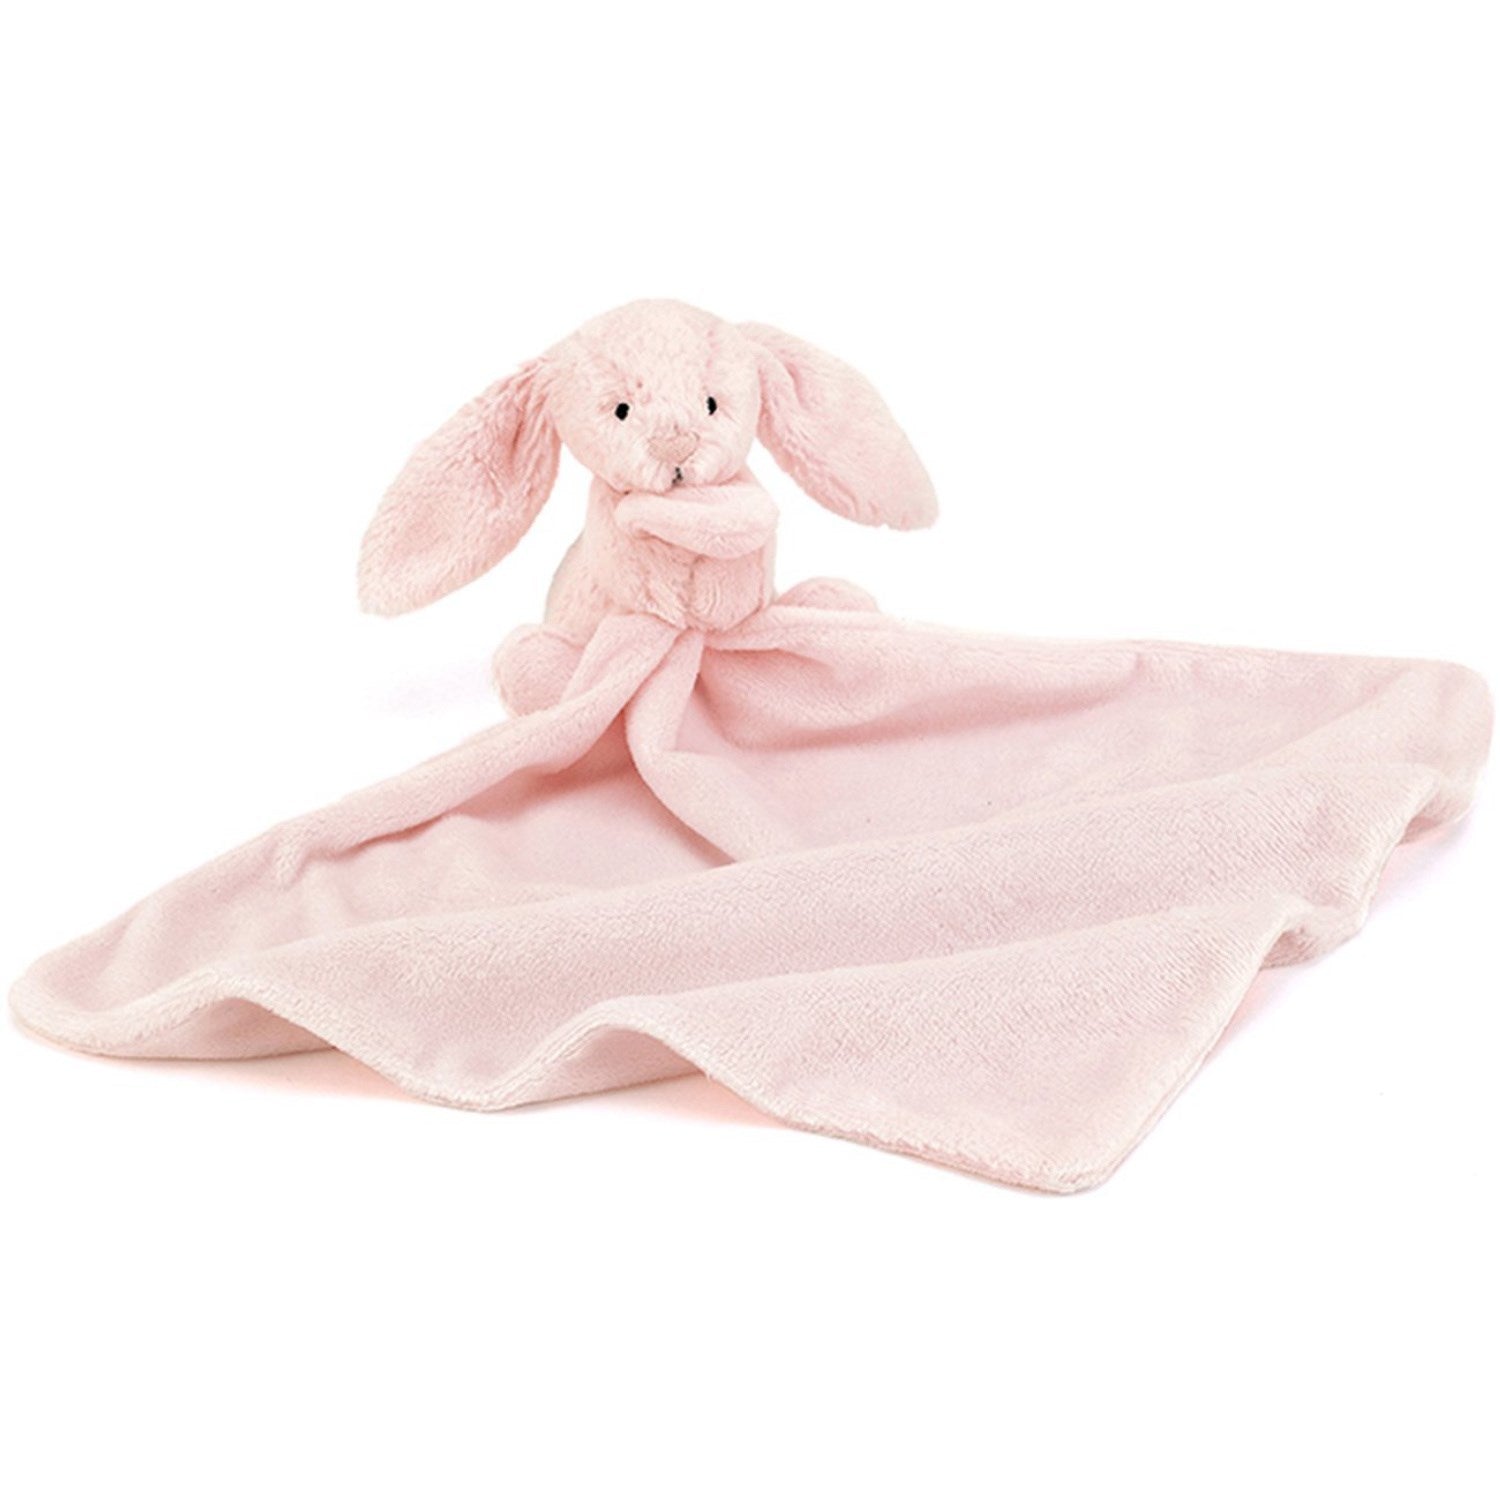   Bashful Pink Bunny Soother